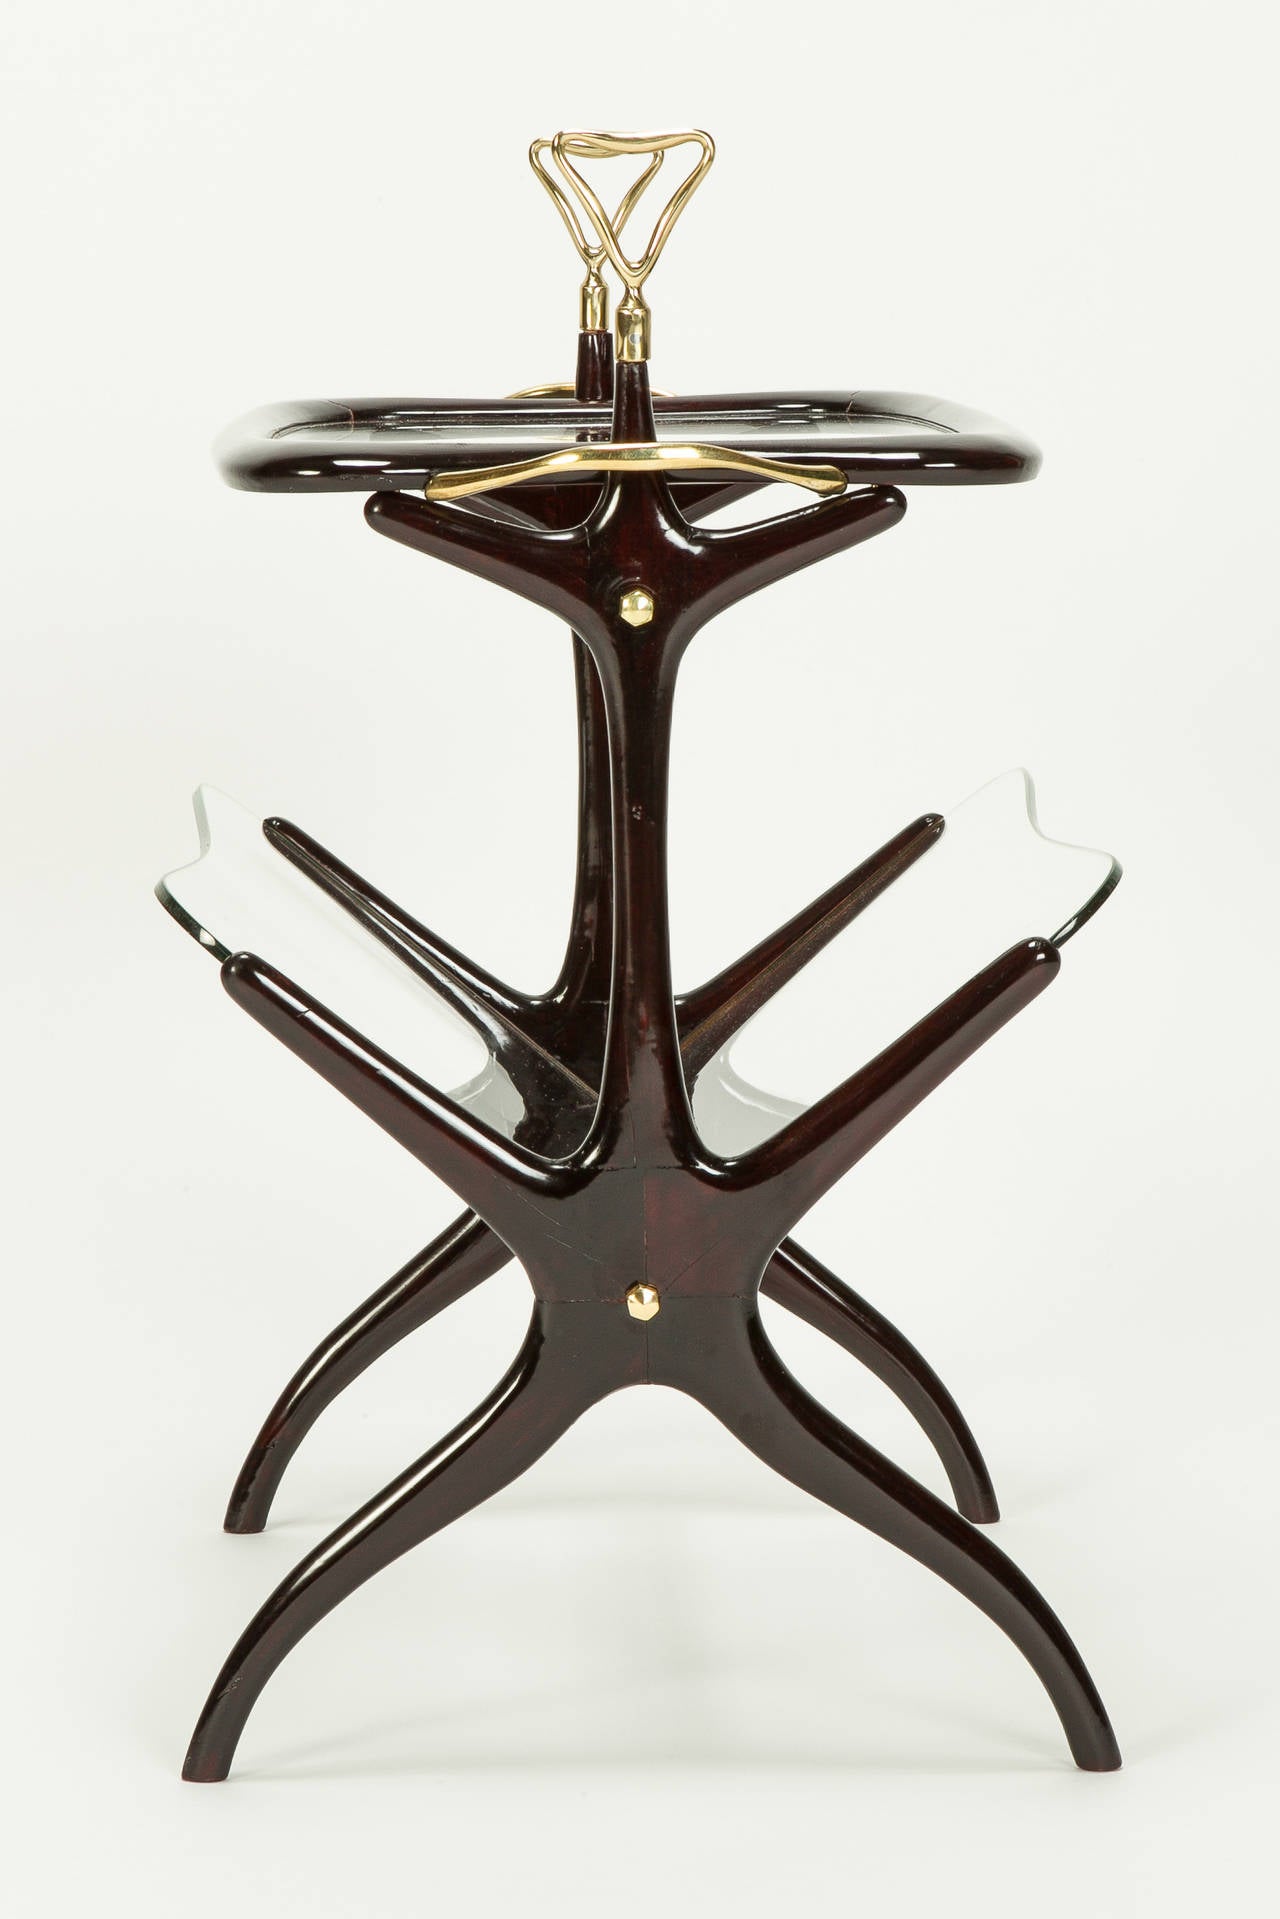 Mid-20th Century Italian Side Table for Drinks and Magazines by Cesare Lacca, 1950s